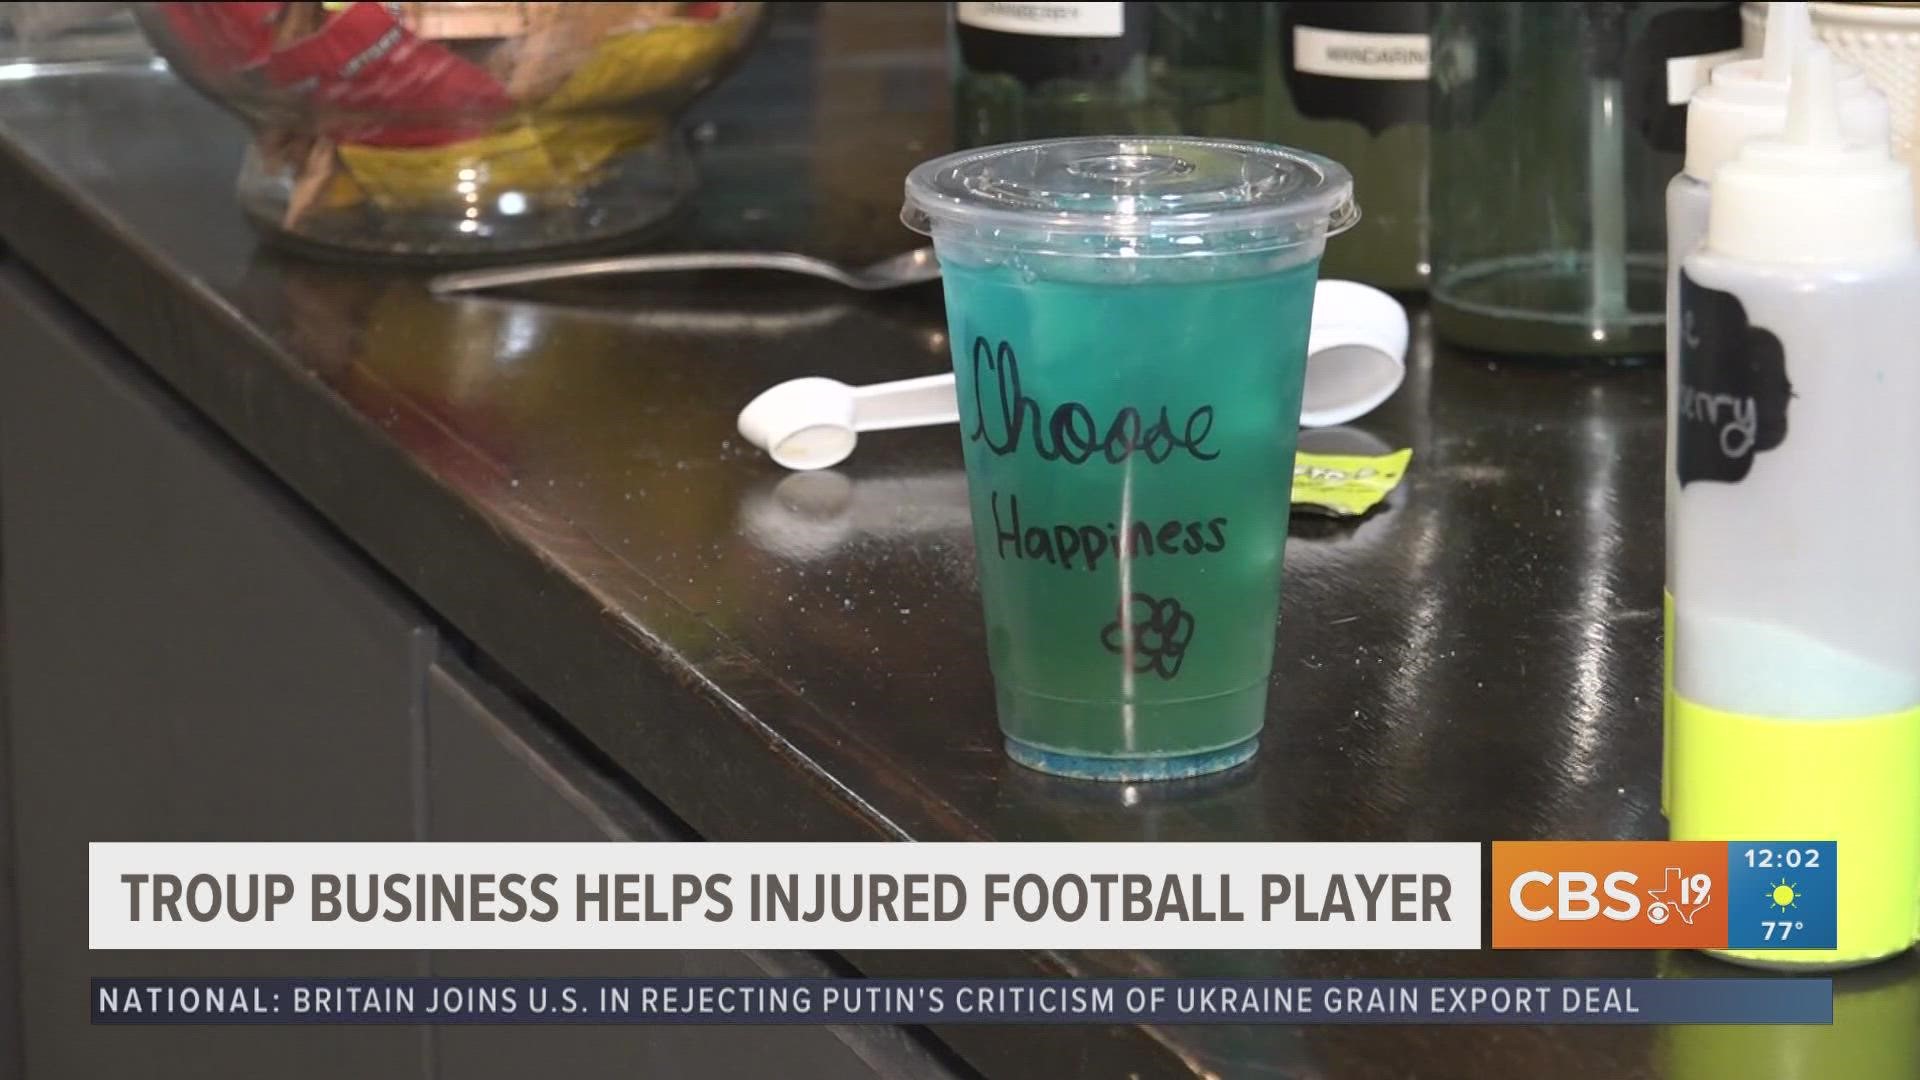 School districts and businesses all over East Texas are wearing blue for a high school football player who suffered a severe brain injury during a Friday night